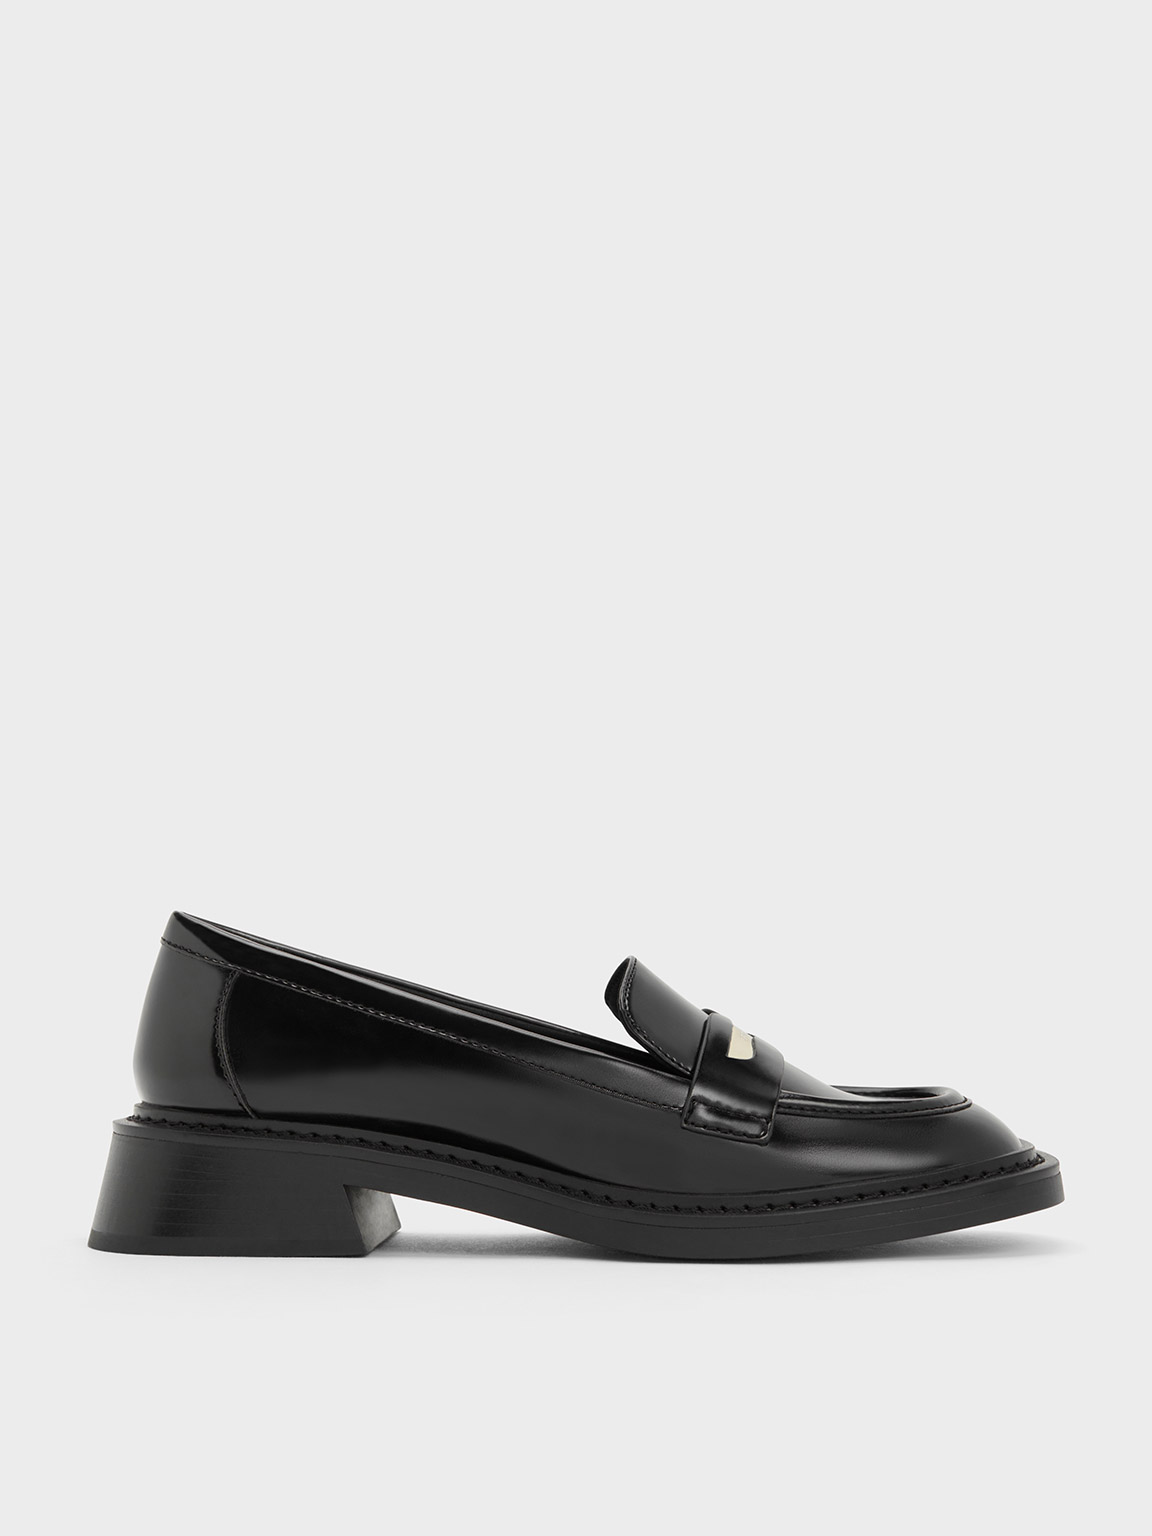 Charles & Keith Metallic Penny Tab Loafers In Black Boxed